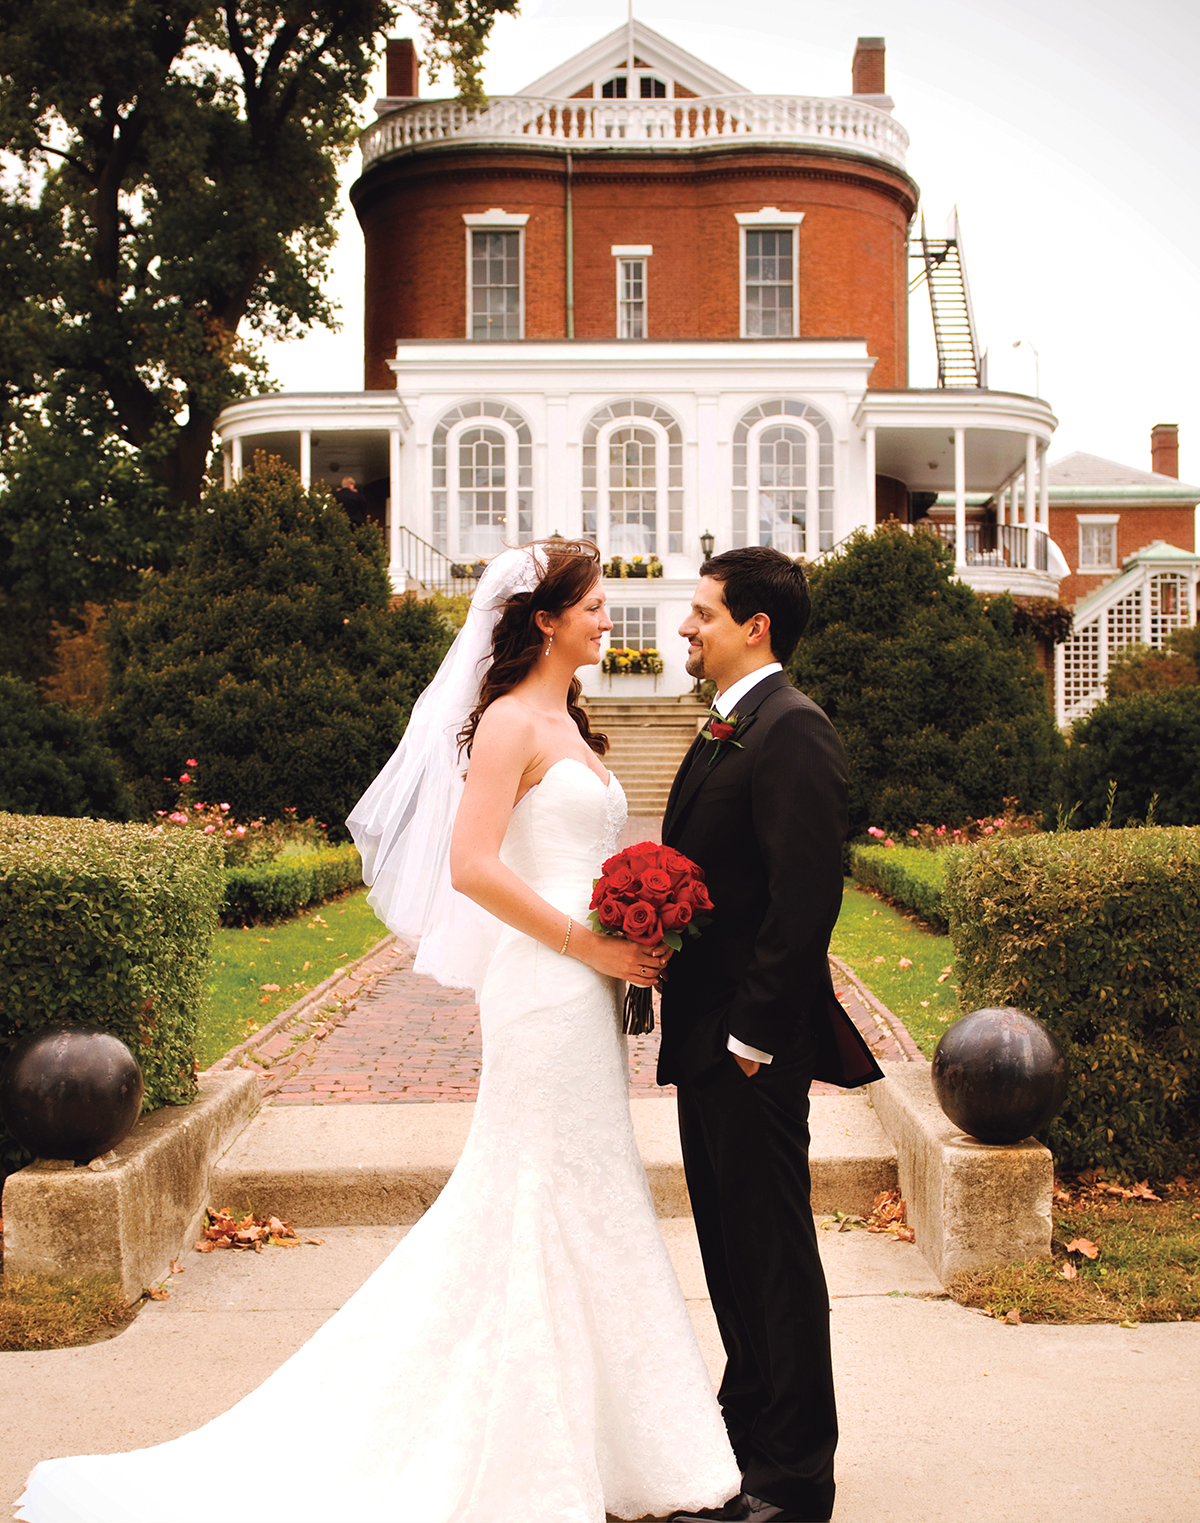 picture perfect wedding venues